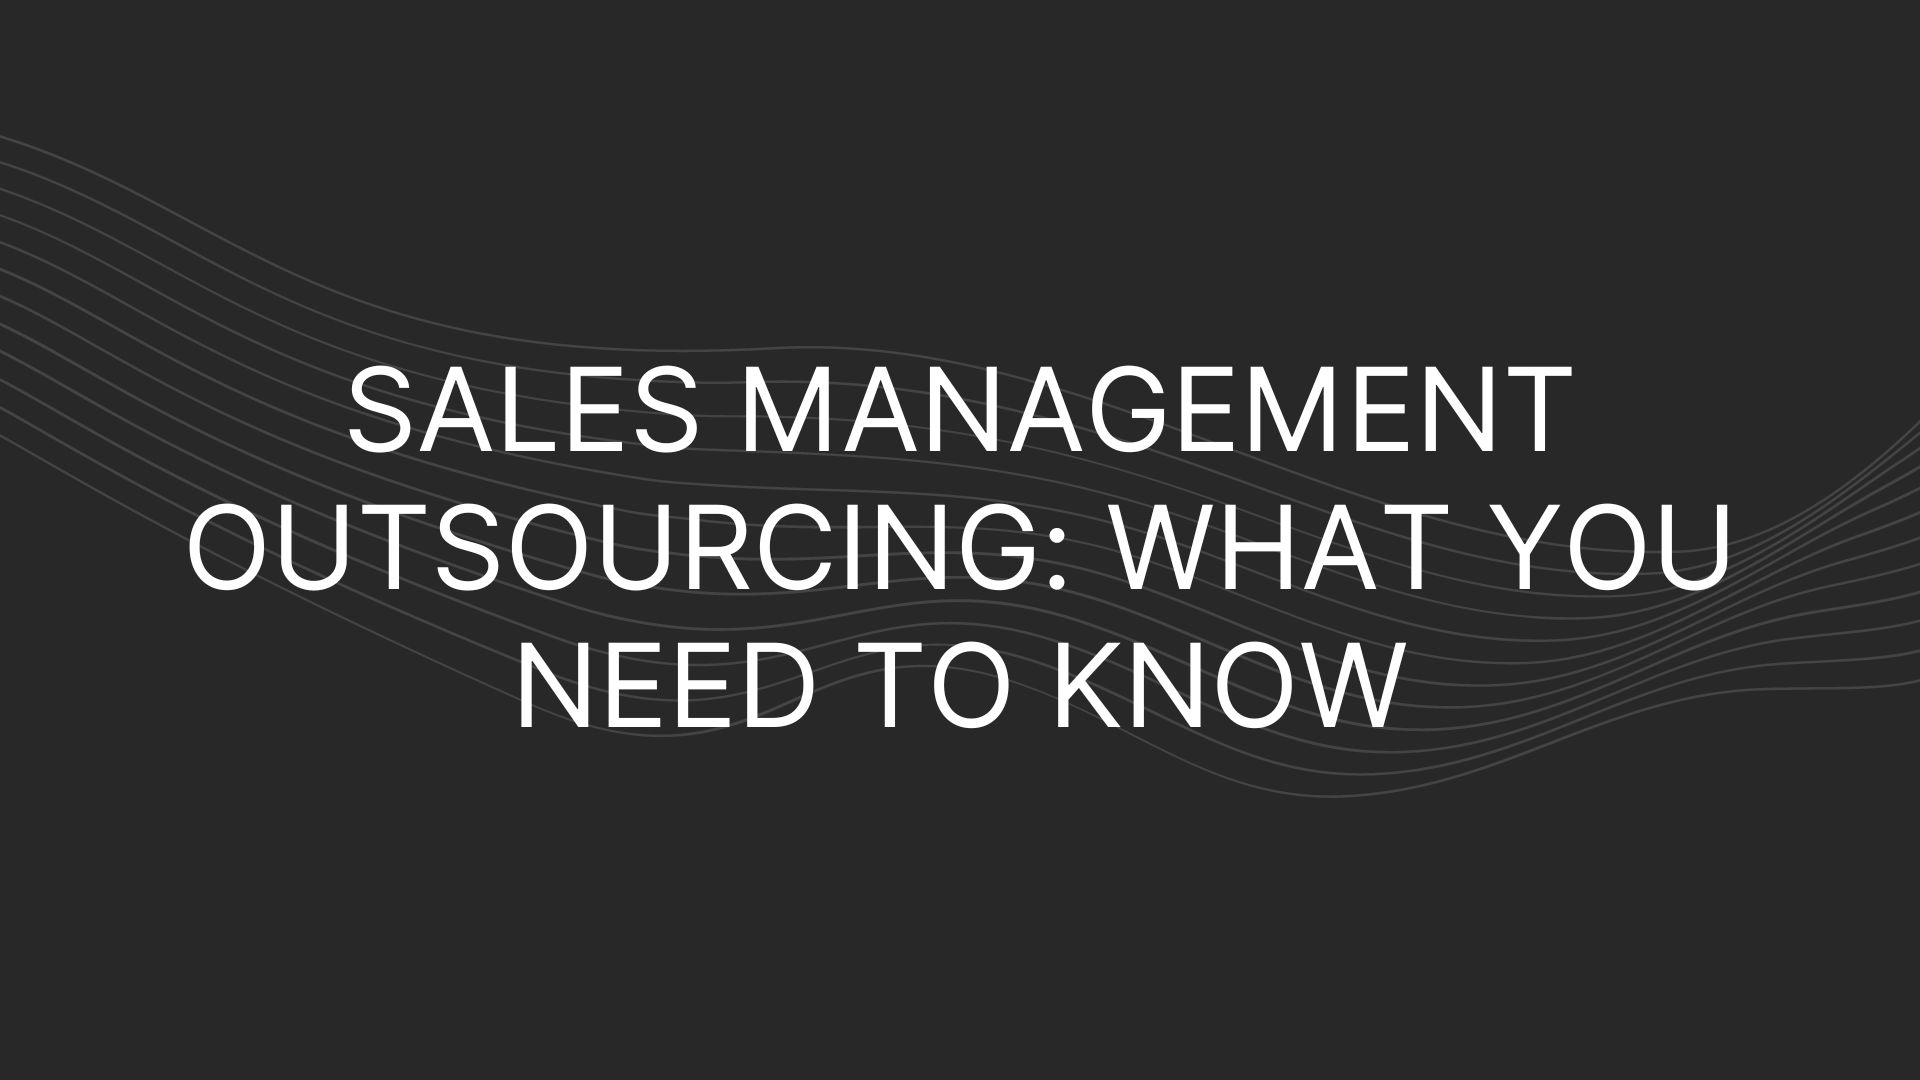 sales management outsourcing, outsourcing sales management